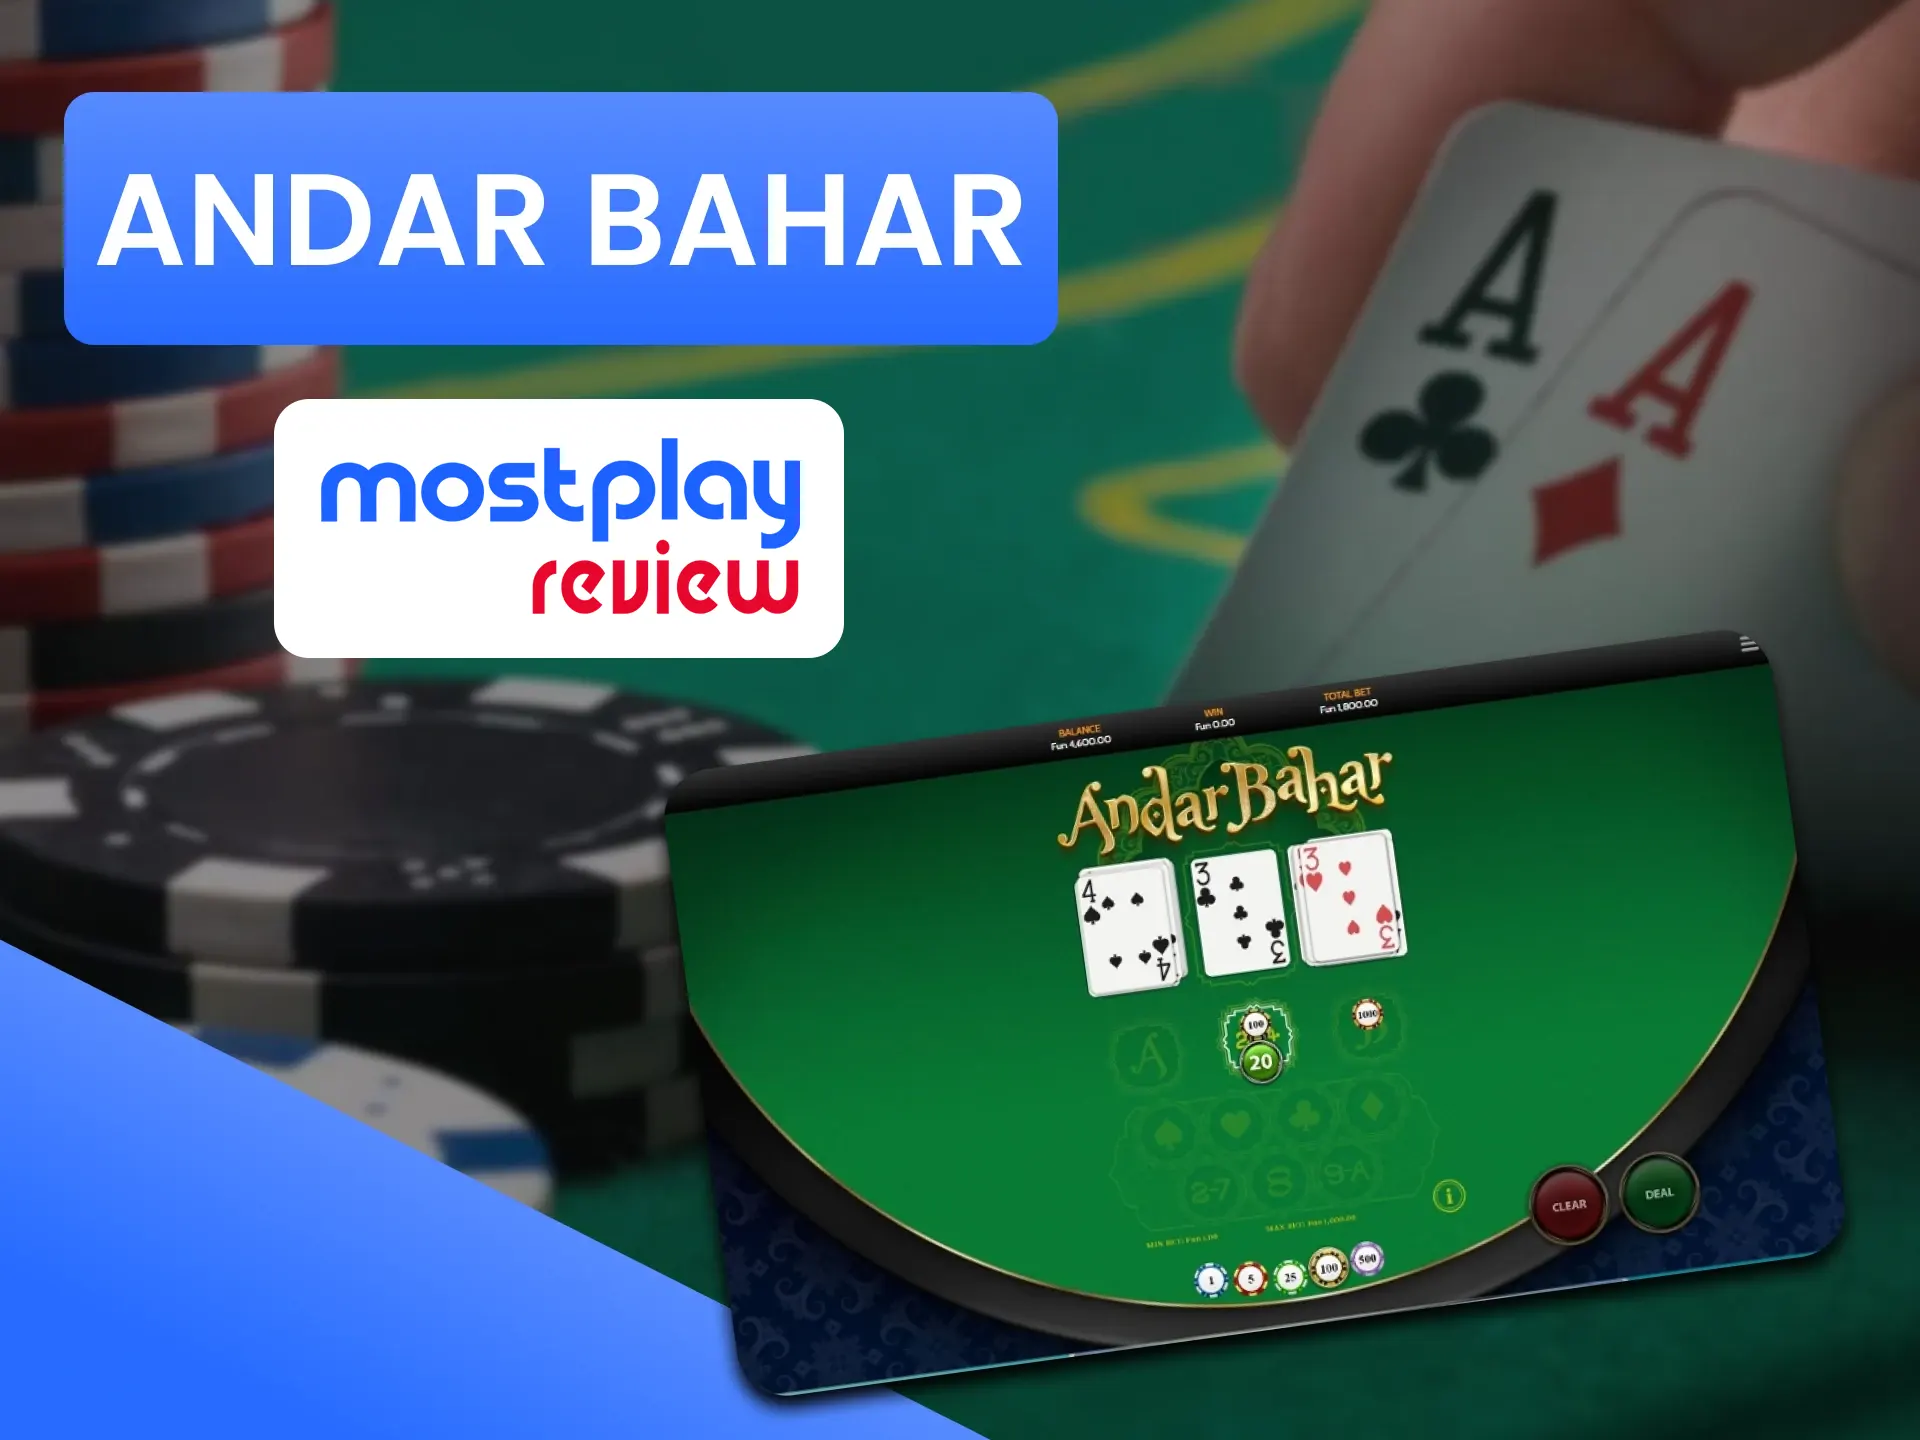 Choose Andar Bahar for casino games at the Mostplay.